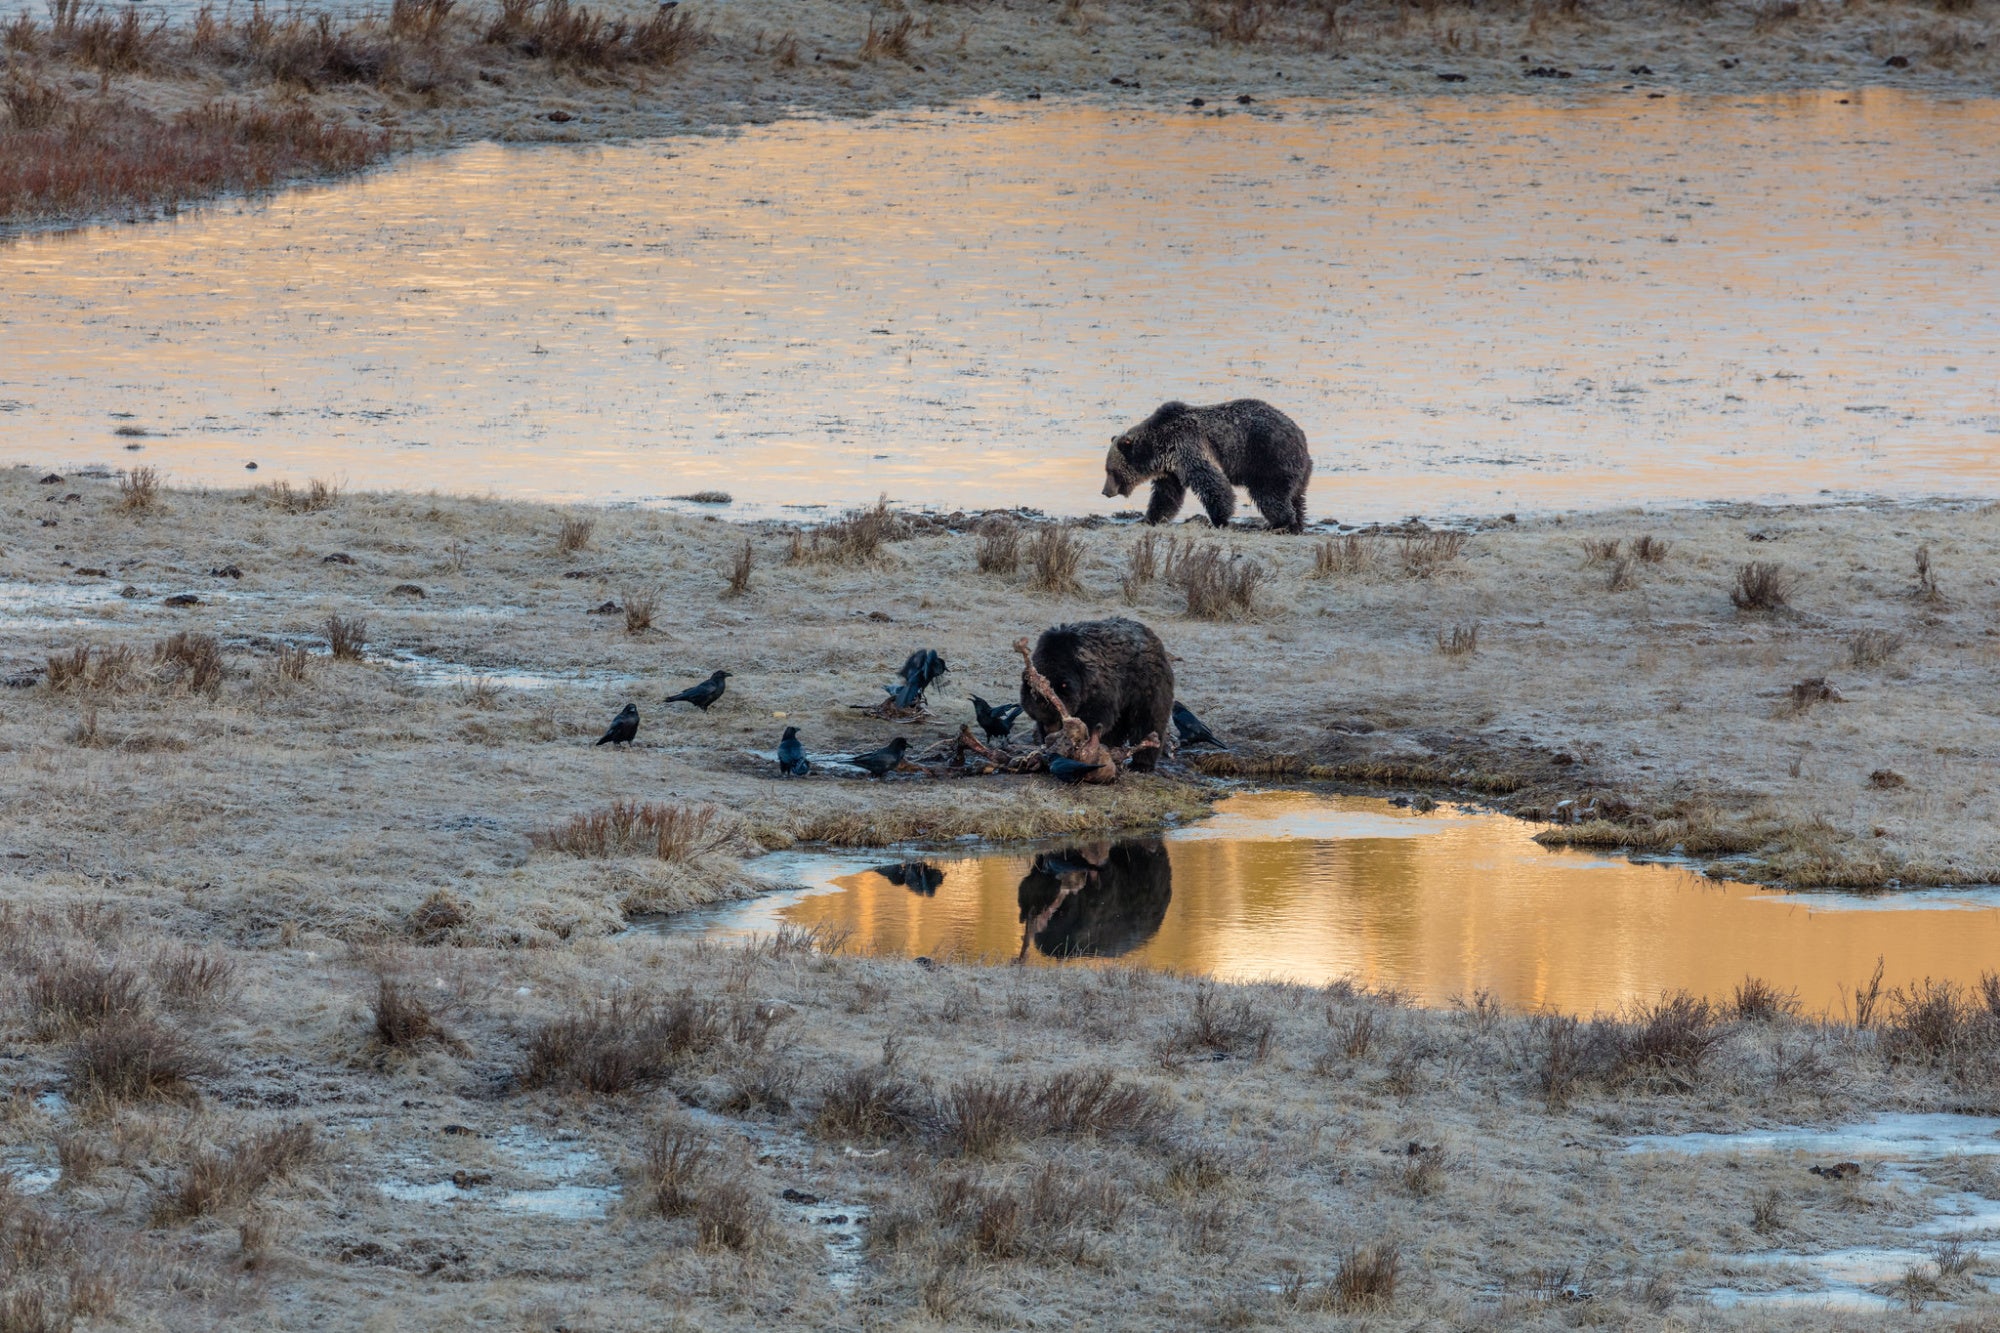 grizzly bears eat bison carcass